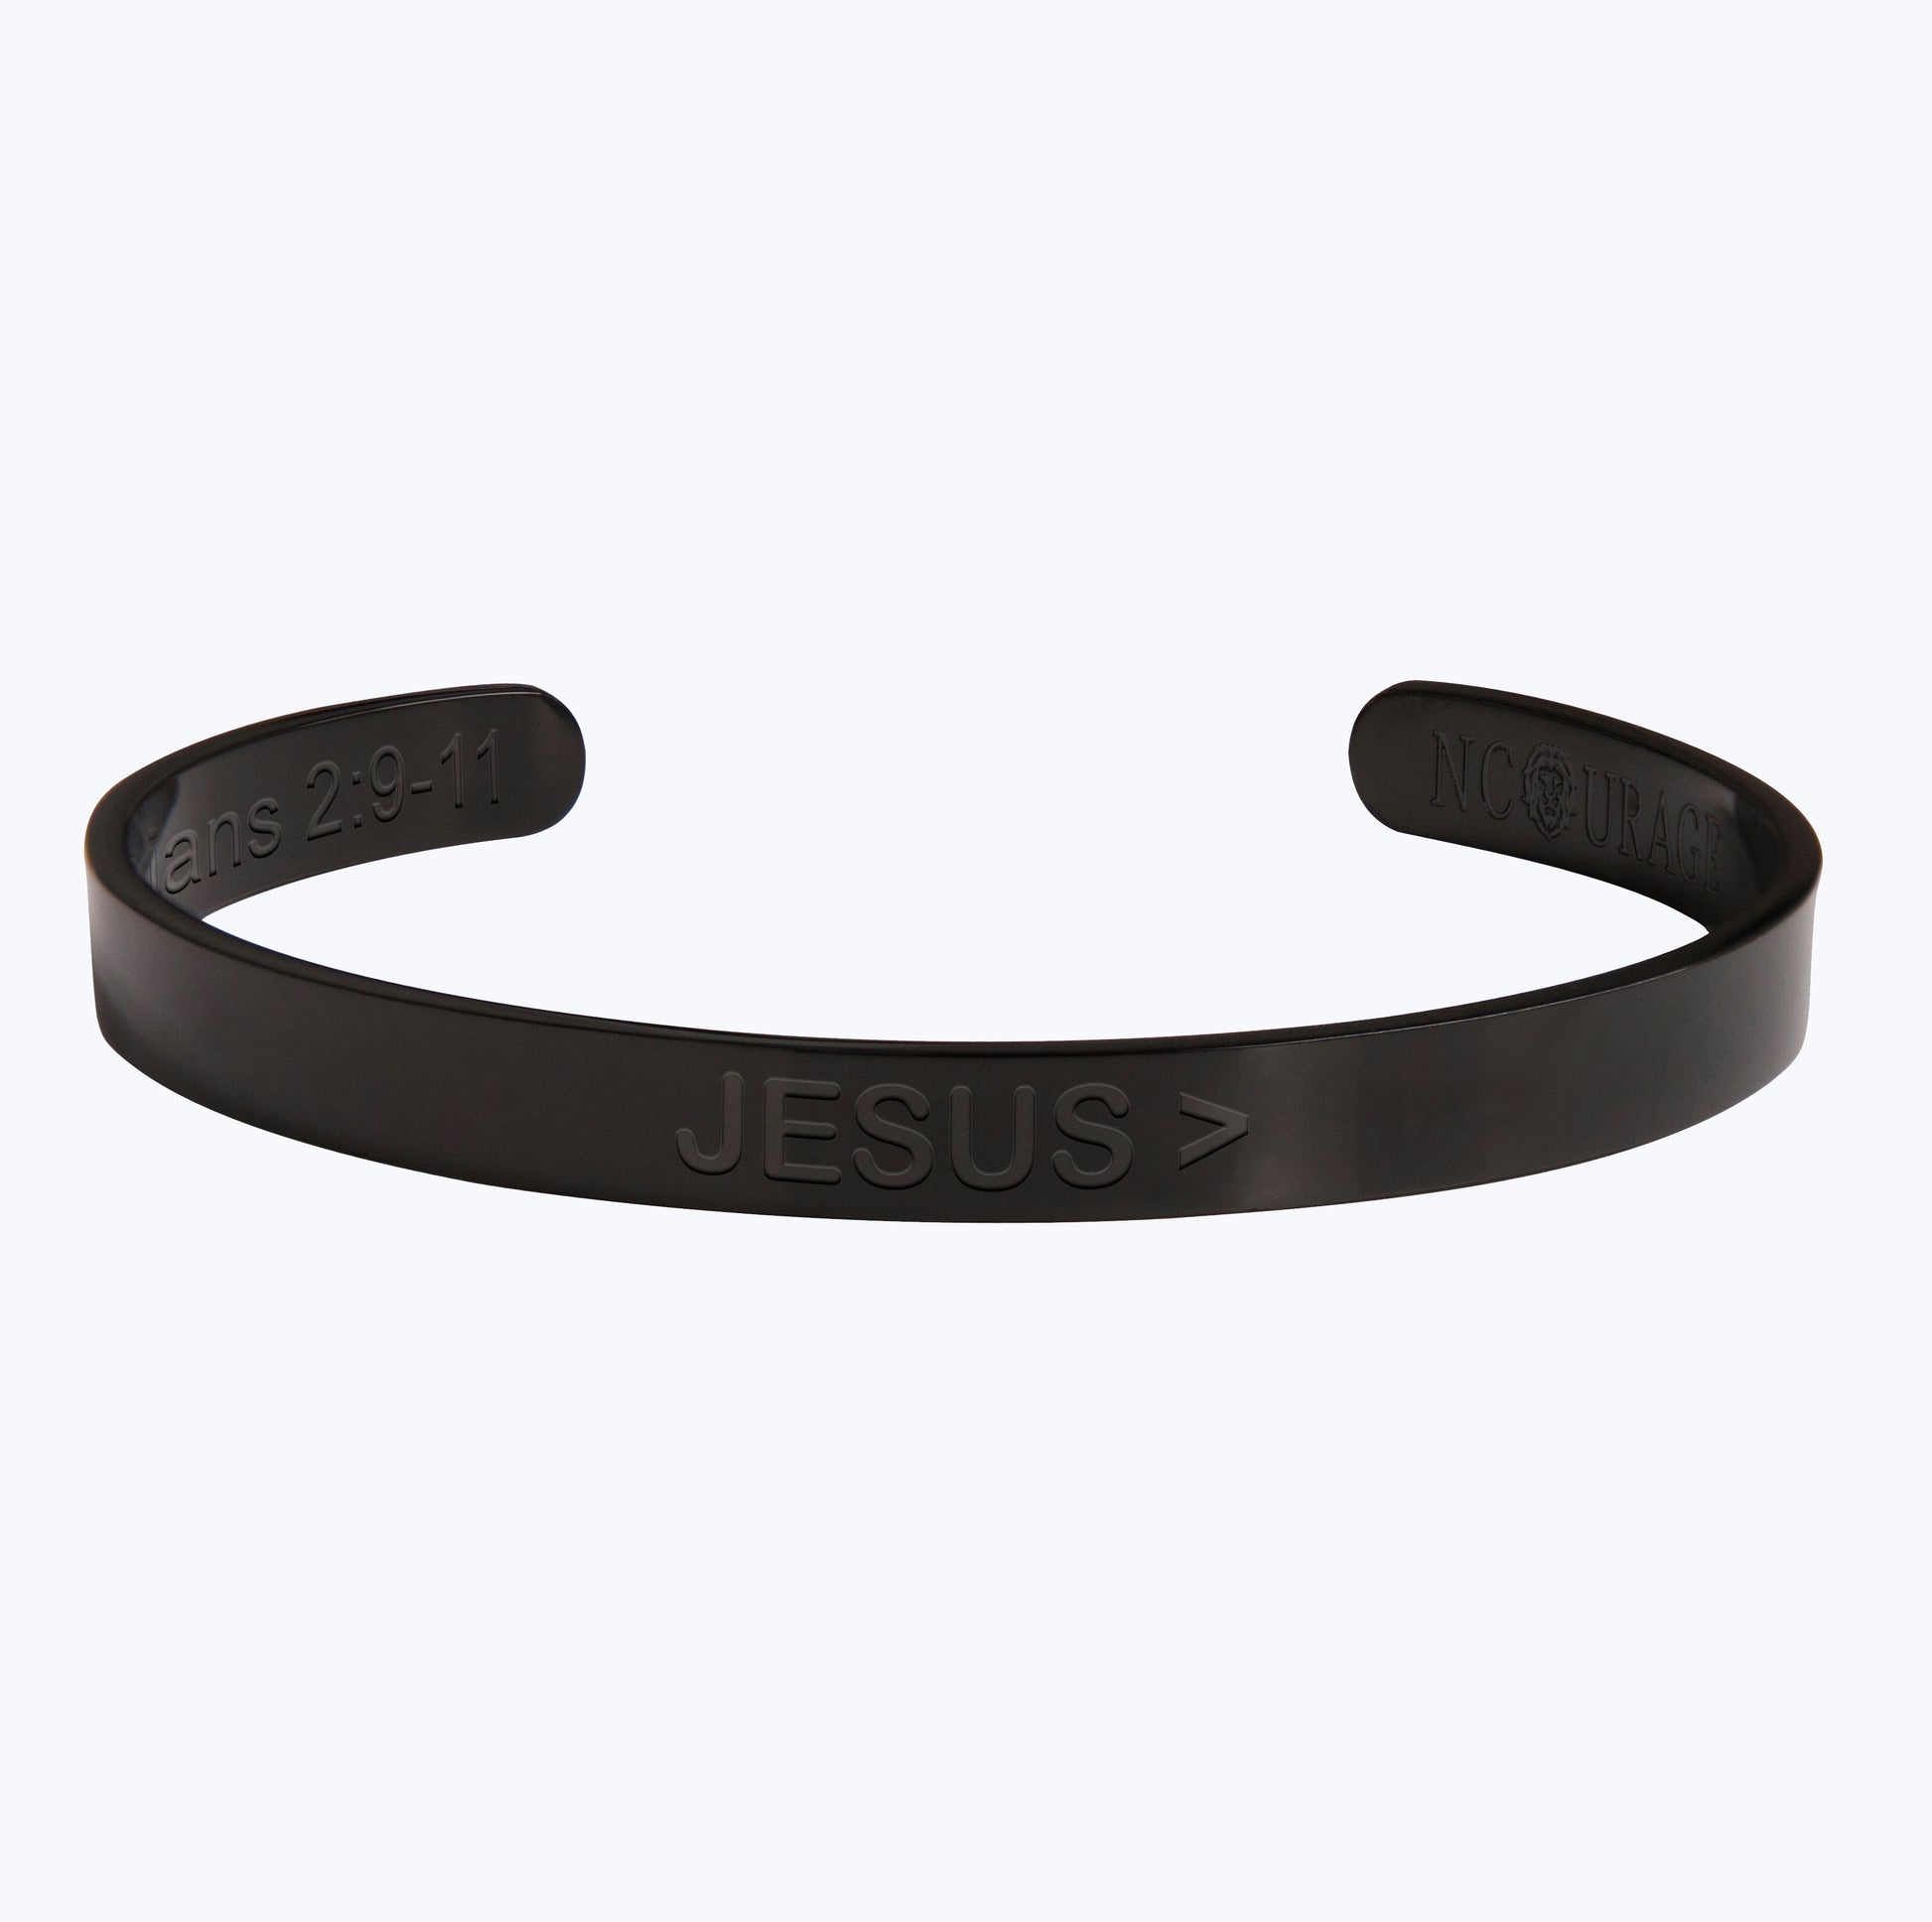 JESUS> (7mm) - NCOURAGE Bands and Bracelets